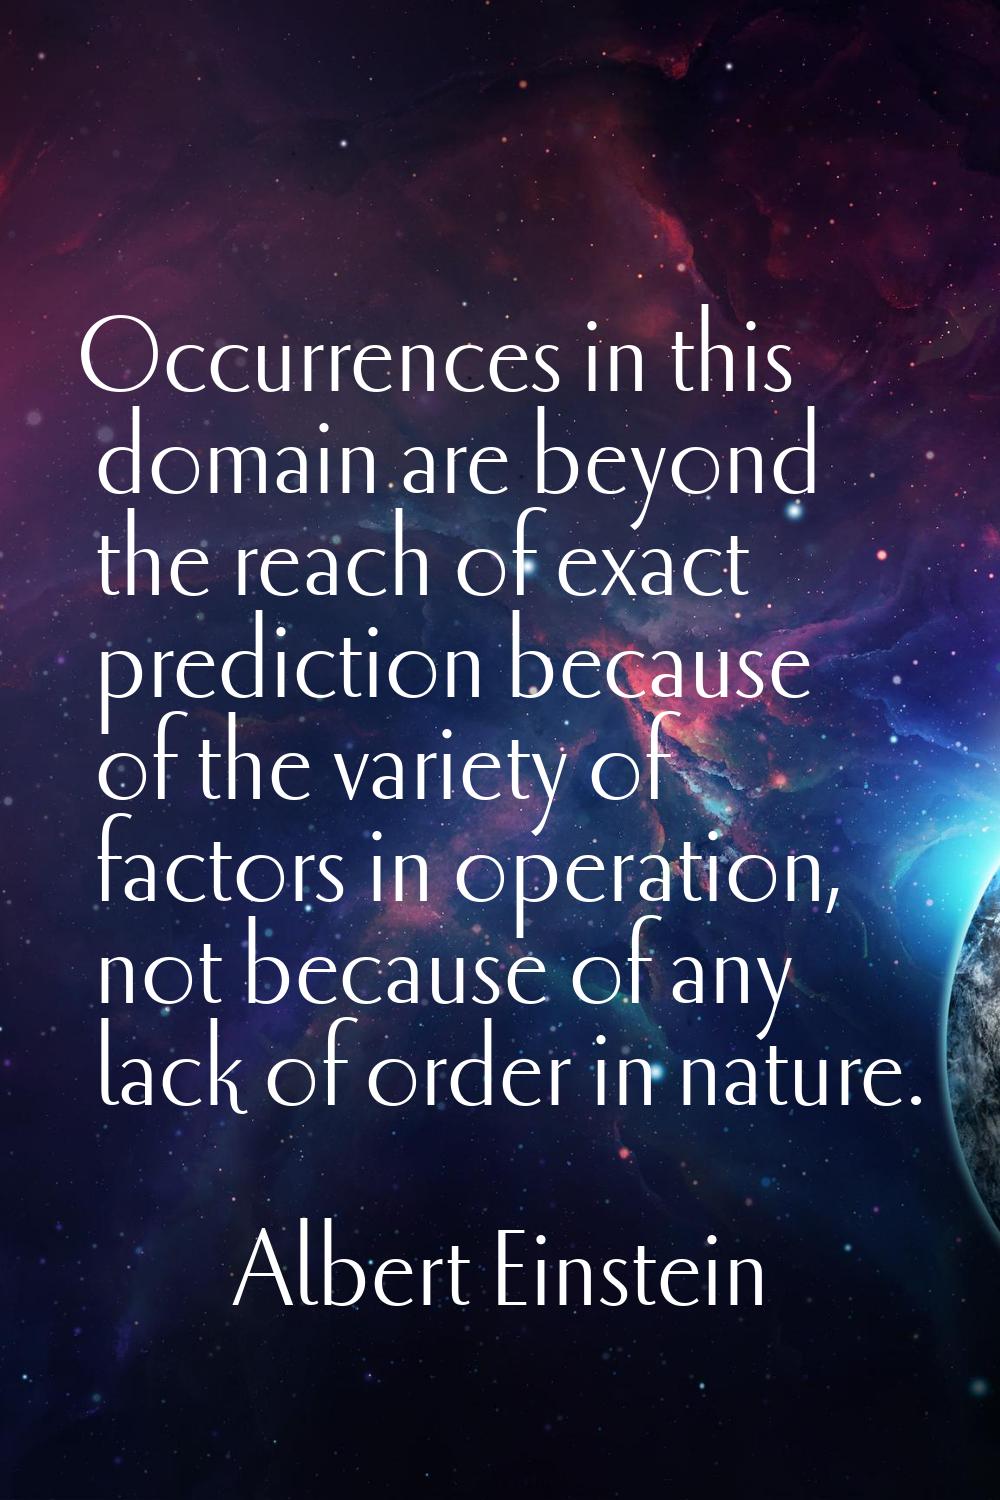 Occurrences in this domain are beyond the reach of exact prediction because of the variety of facto